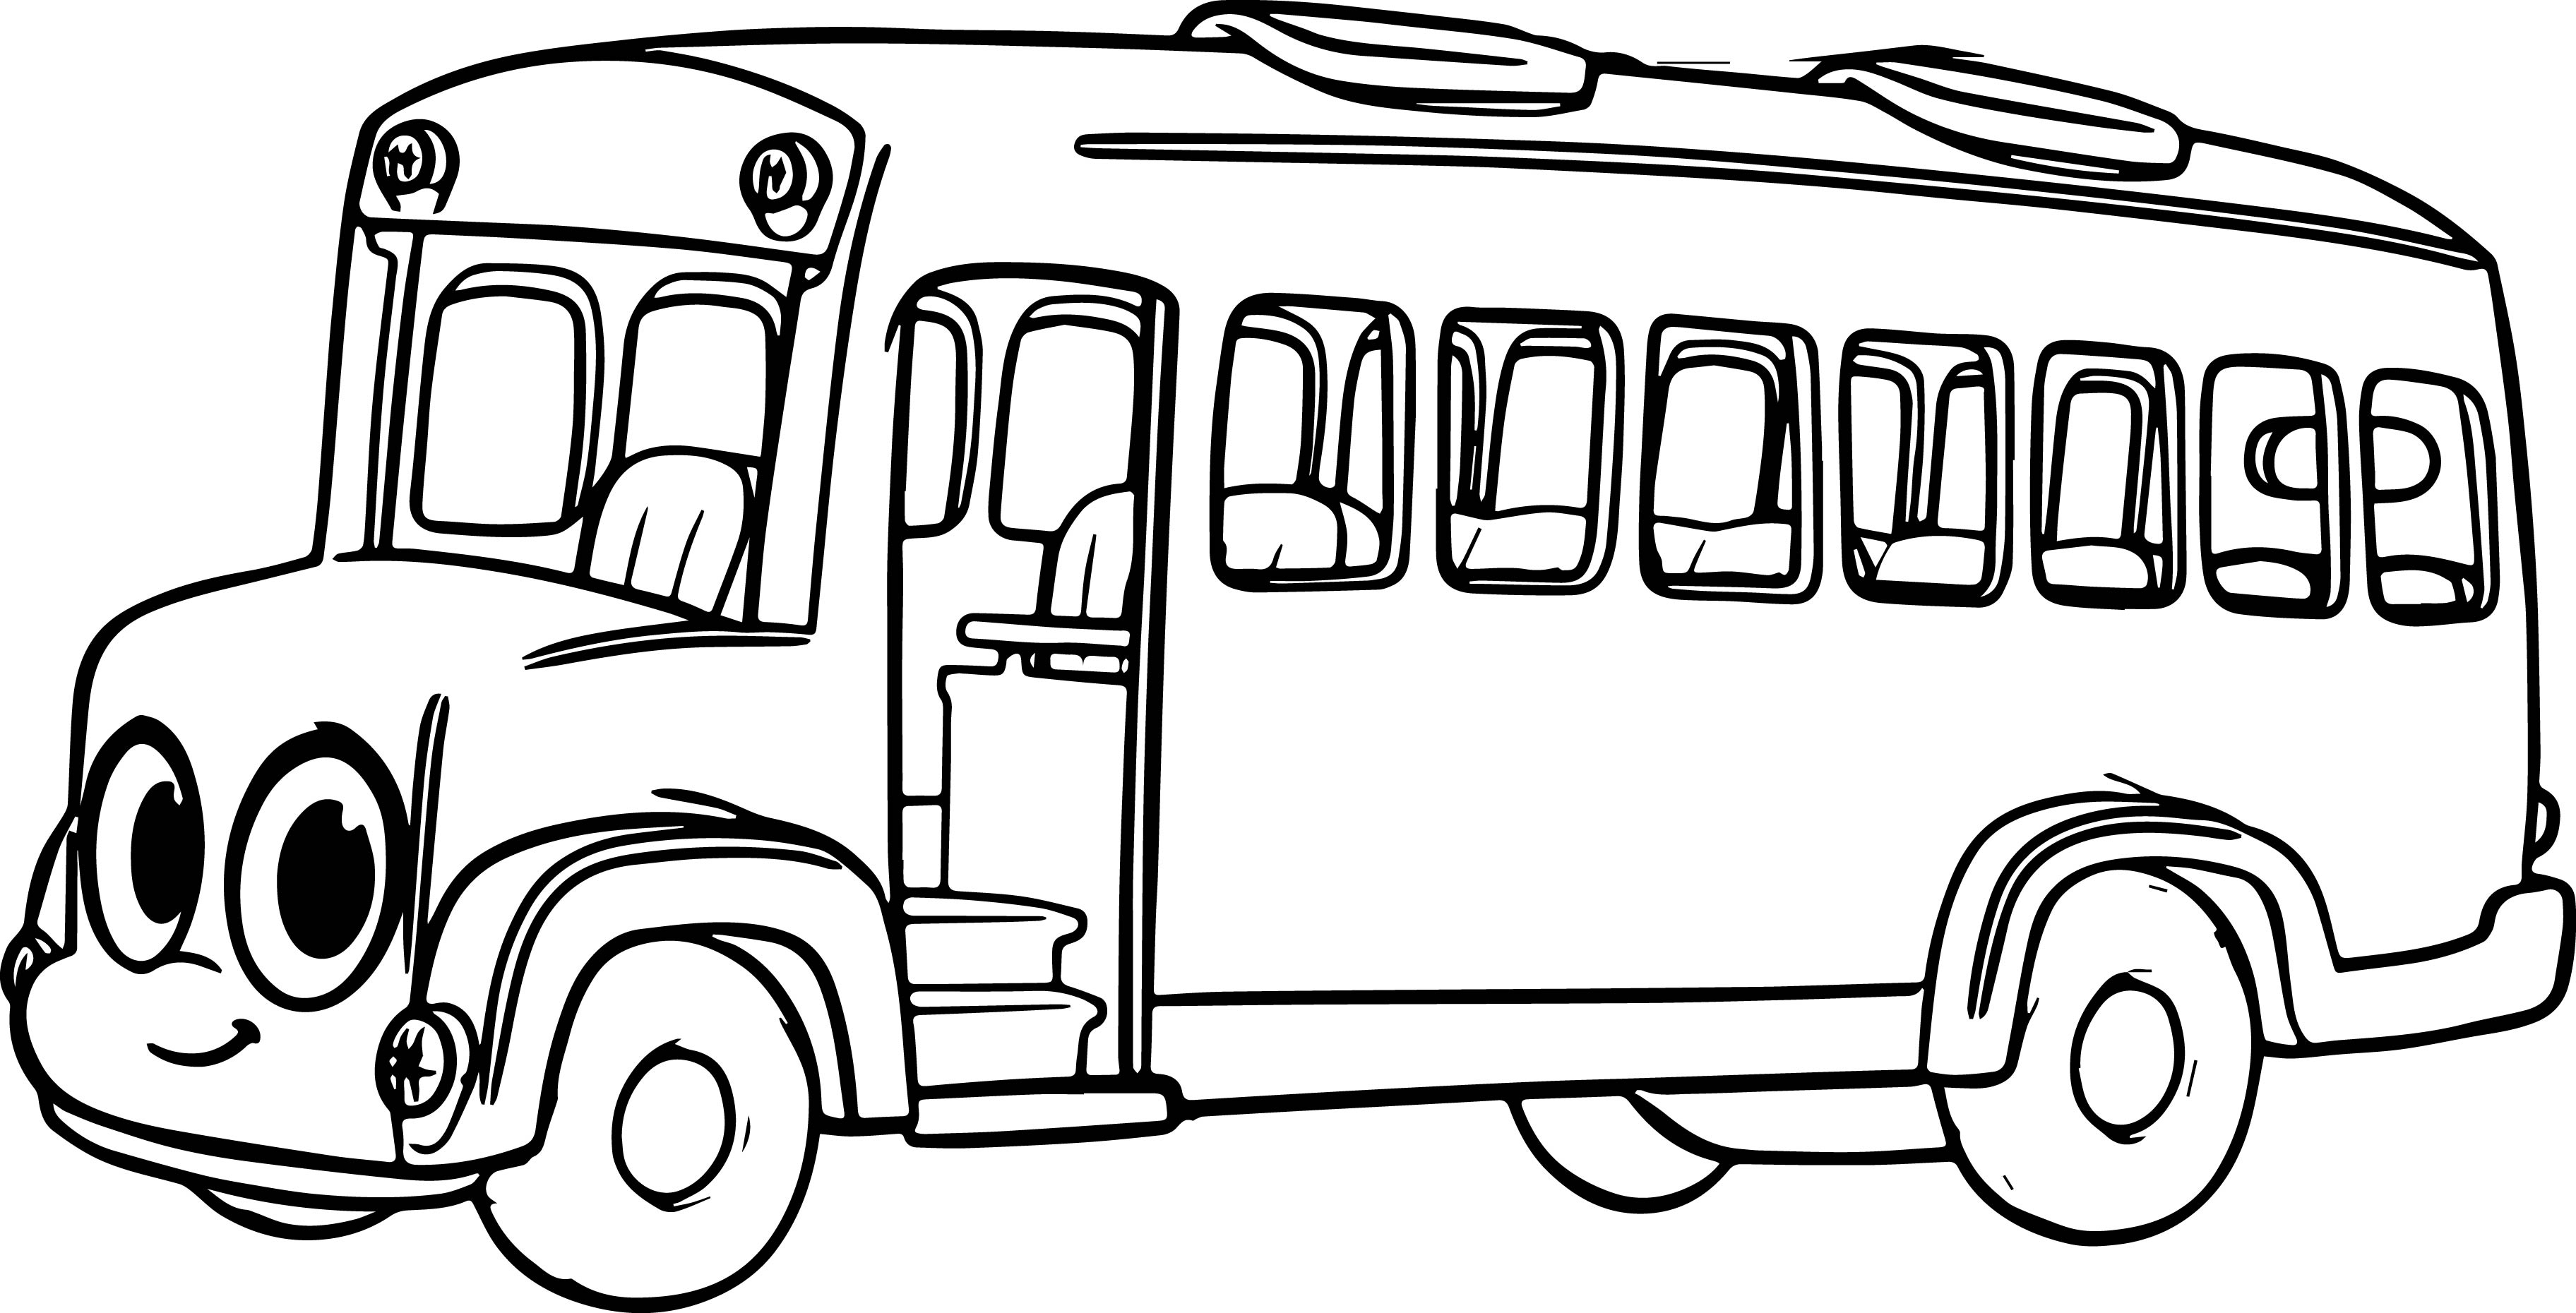 City Bus Coloring Page at Free printable colorings